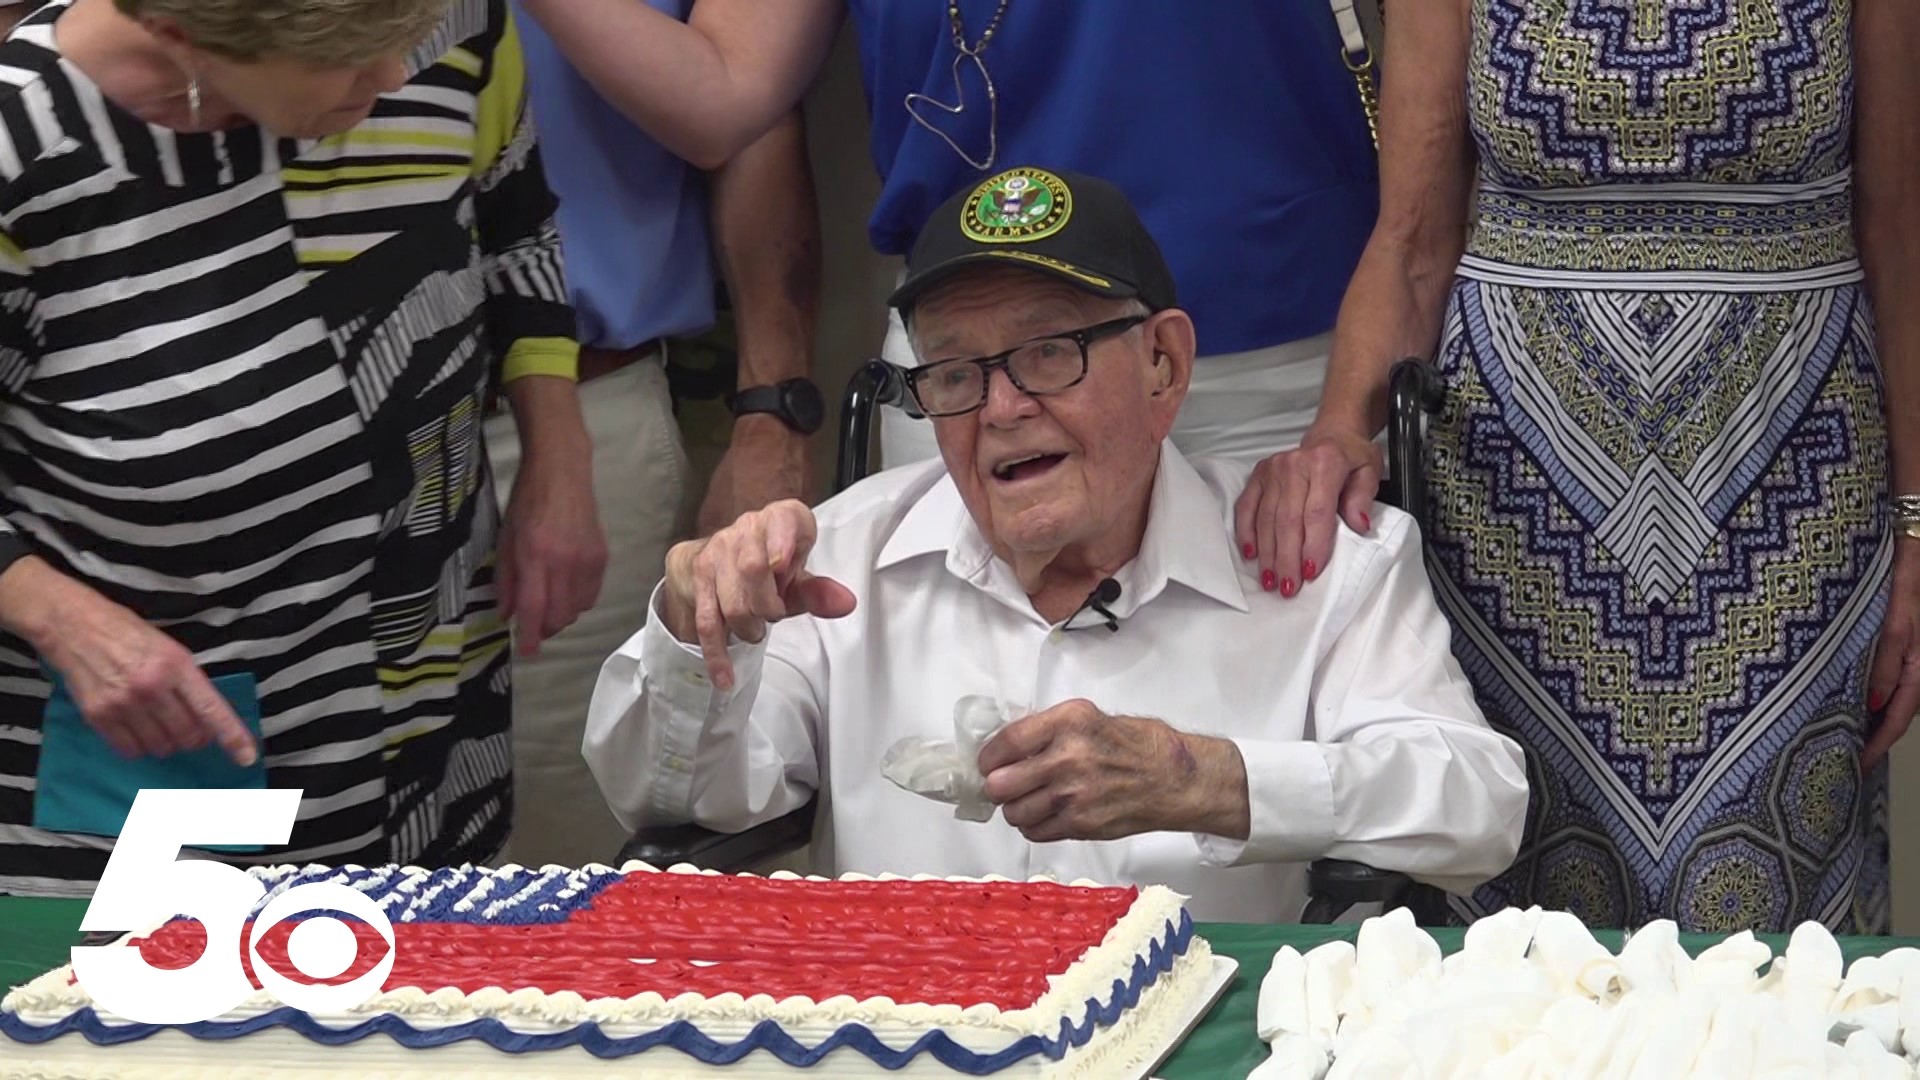 One of the oldest surviving WWII veterans in the United States celebrated his 100th birthday.